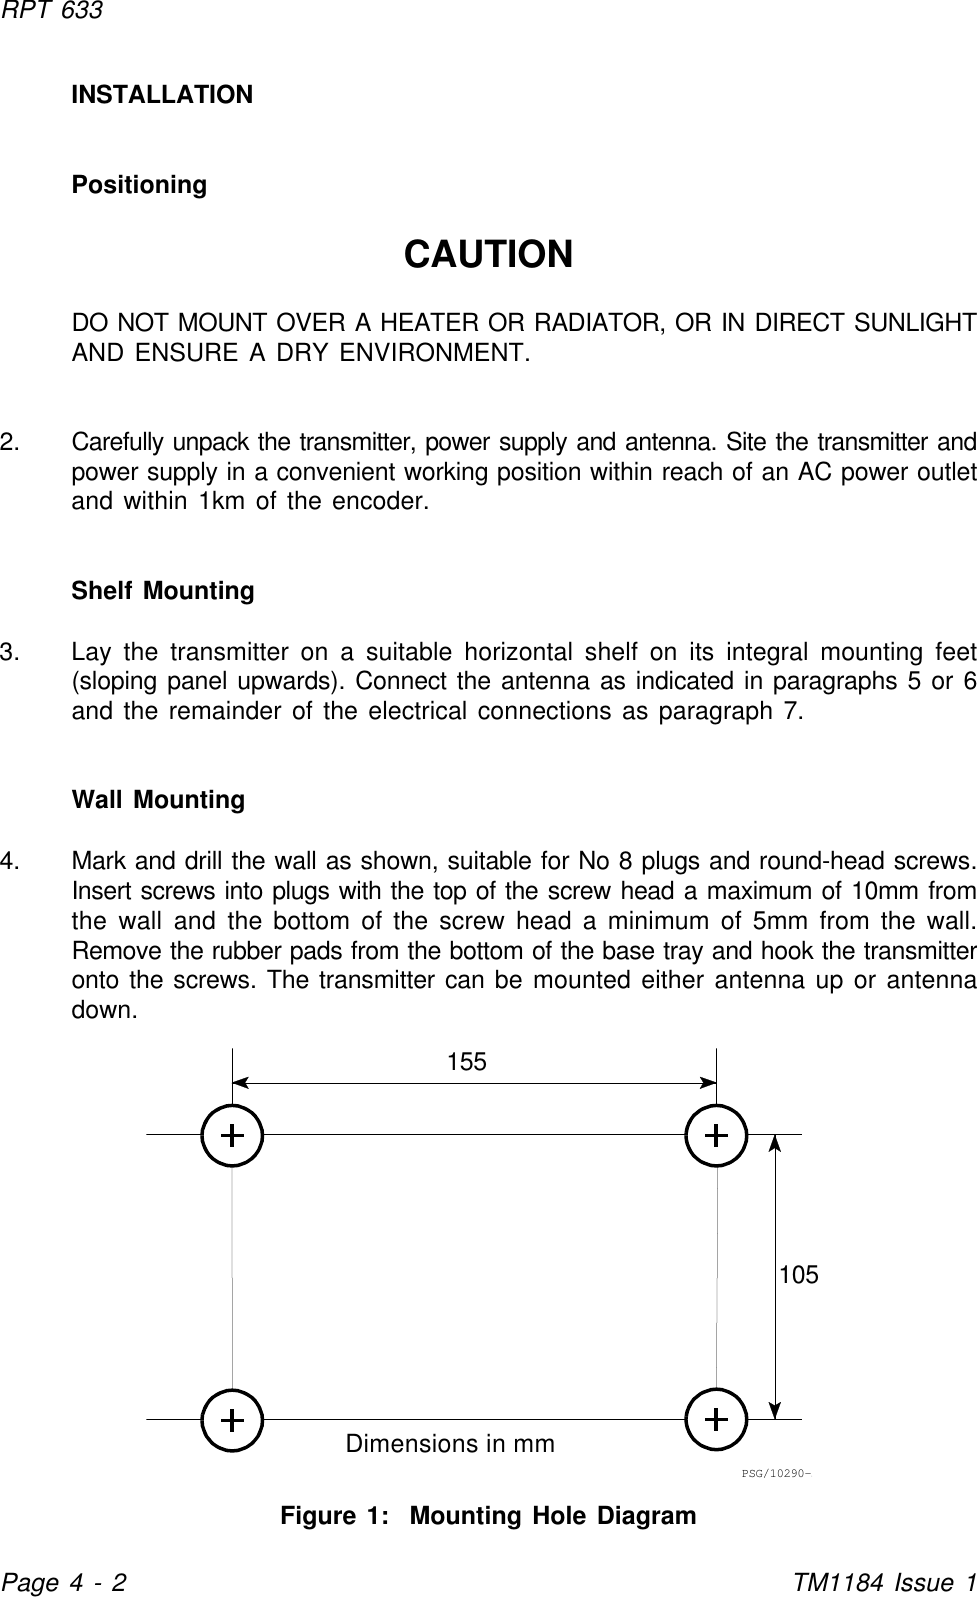 155105Dimensions in mmPSG/10290-1RPT 633Page 4 - 2TM1184 Issue 1INSTALLATIONPositioningCAUTIONDO NOT MOUNT OVER A HEATER OR RADIATOR, OR IN DIRECT SUNLIGHTAND ENSURE A DRY ENVIRONMENT.2. Carefully unpack the transmitter, power supply and antenna. Site the transmitter andpower supply in a convenient working position within reach of an AC power outletand within 1km of the encoder.Shelf Mounting3. Lay the transmitter on a suitable horizontal shelf on its integral mounting feet(sloping panel upwards). Connect the antenna as indicated in paragraphs 5 or 6and the remainder of the electrical connections as paragraph 7.Wall Mounting4. Mark and drill the wall as shown, suitable for No 8 plugs and round-head screws.Insert screws into plugs with the top of the screw head a maximum of 10mm fromthe wall and the bottom of the screw head a minimum of 5mm from the wall.Remove the rubber pads from the bottom of the base tray and hook the transmitteronto the screws. The transmitter can be mounted either antenna up or antennadown.Figure 1:  Mounting Hole Diagram